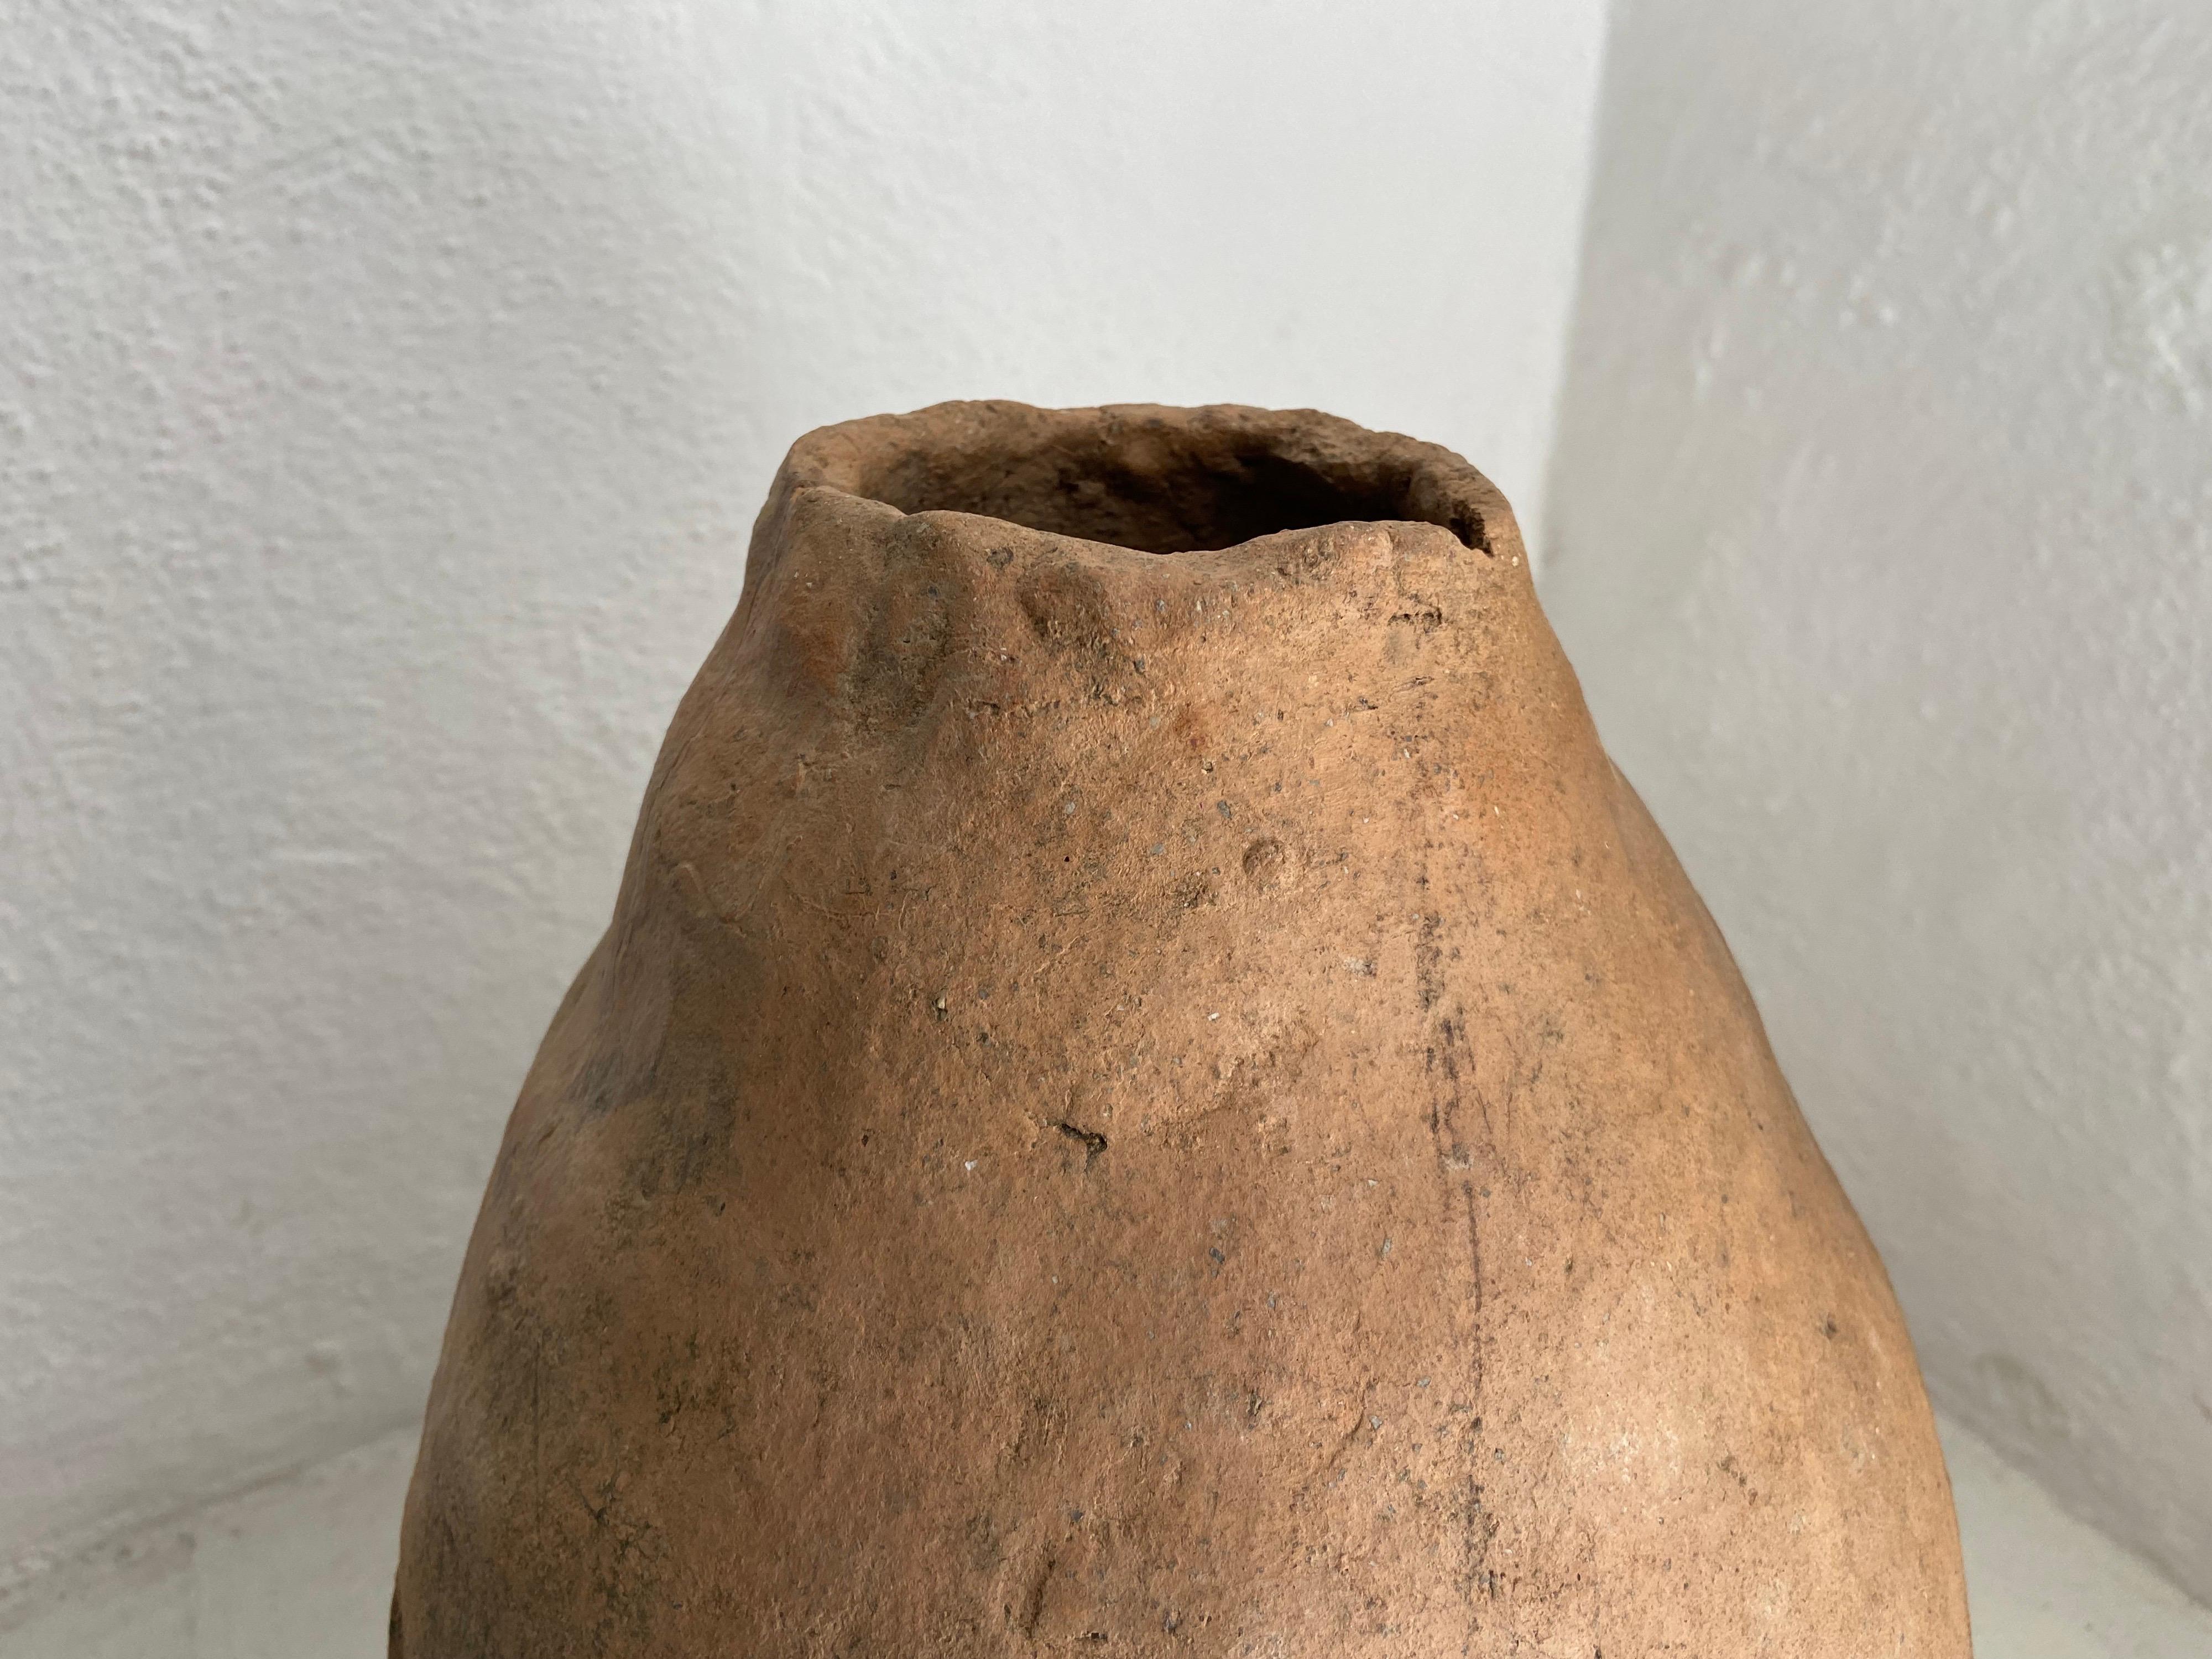 Early 20th century terracotta dome heater from Northern Puebla, Mexico. Firewood was placed inside the 